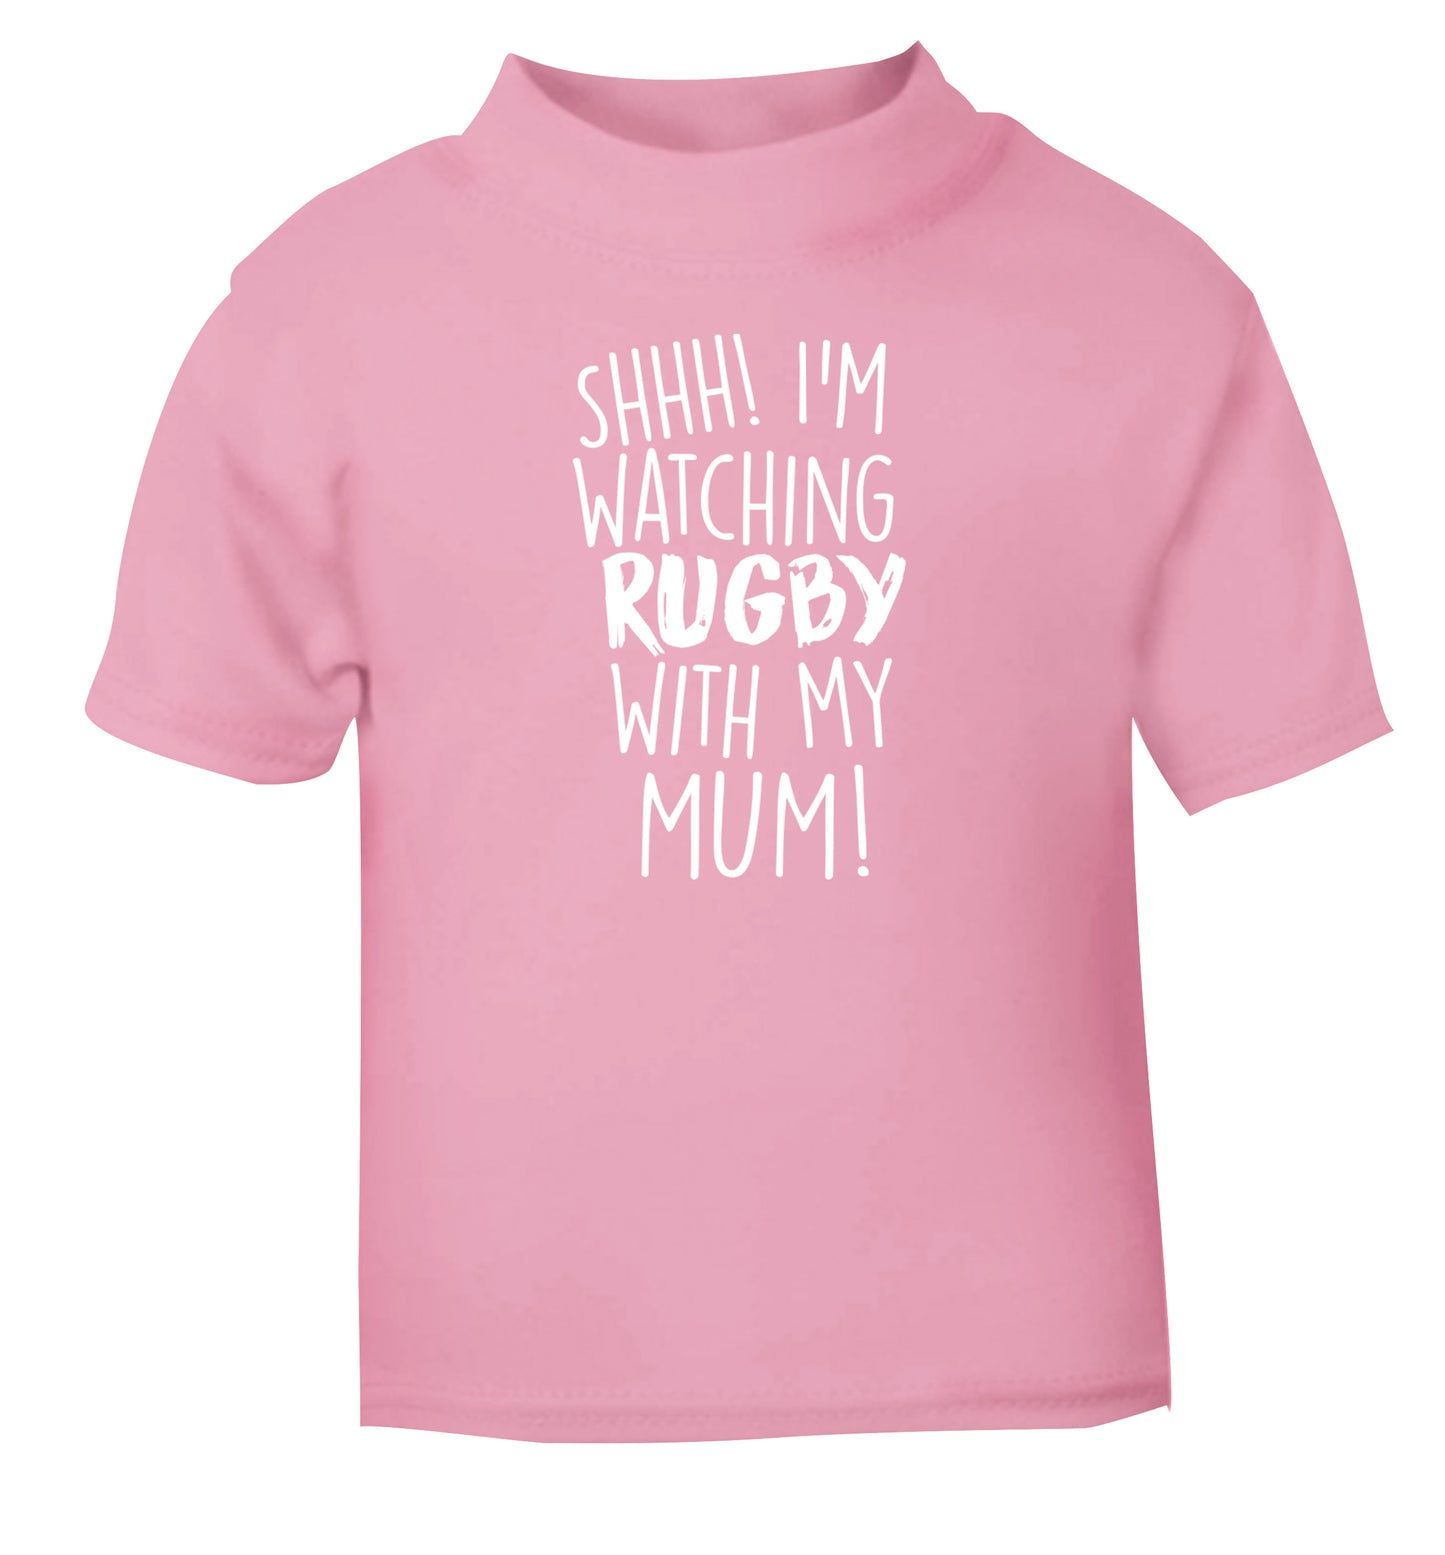 Shh... I'm watching rugby with my mum light pink Baby Toddler Tshirt 2 Years